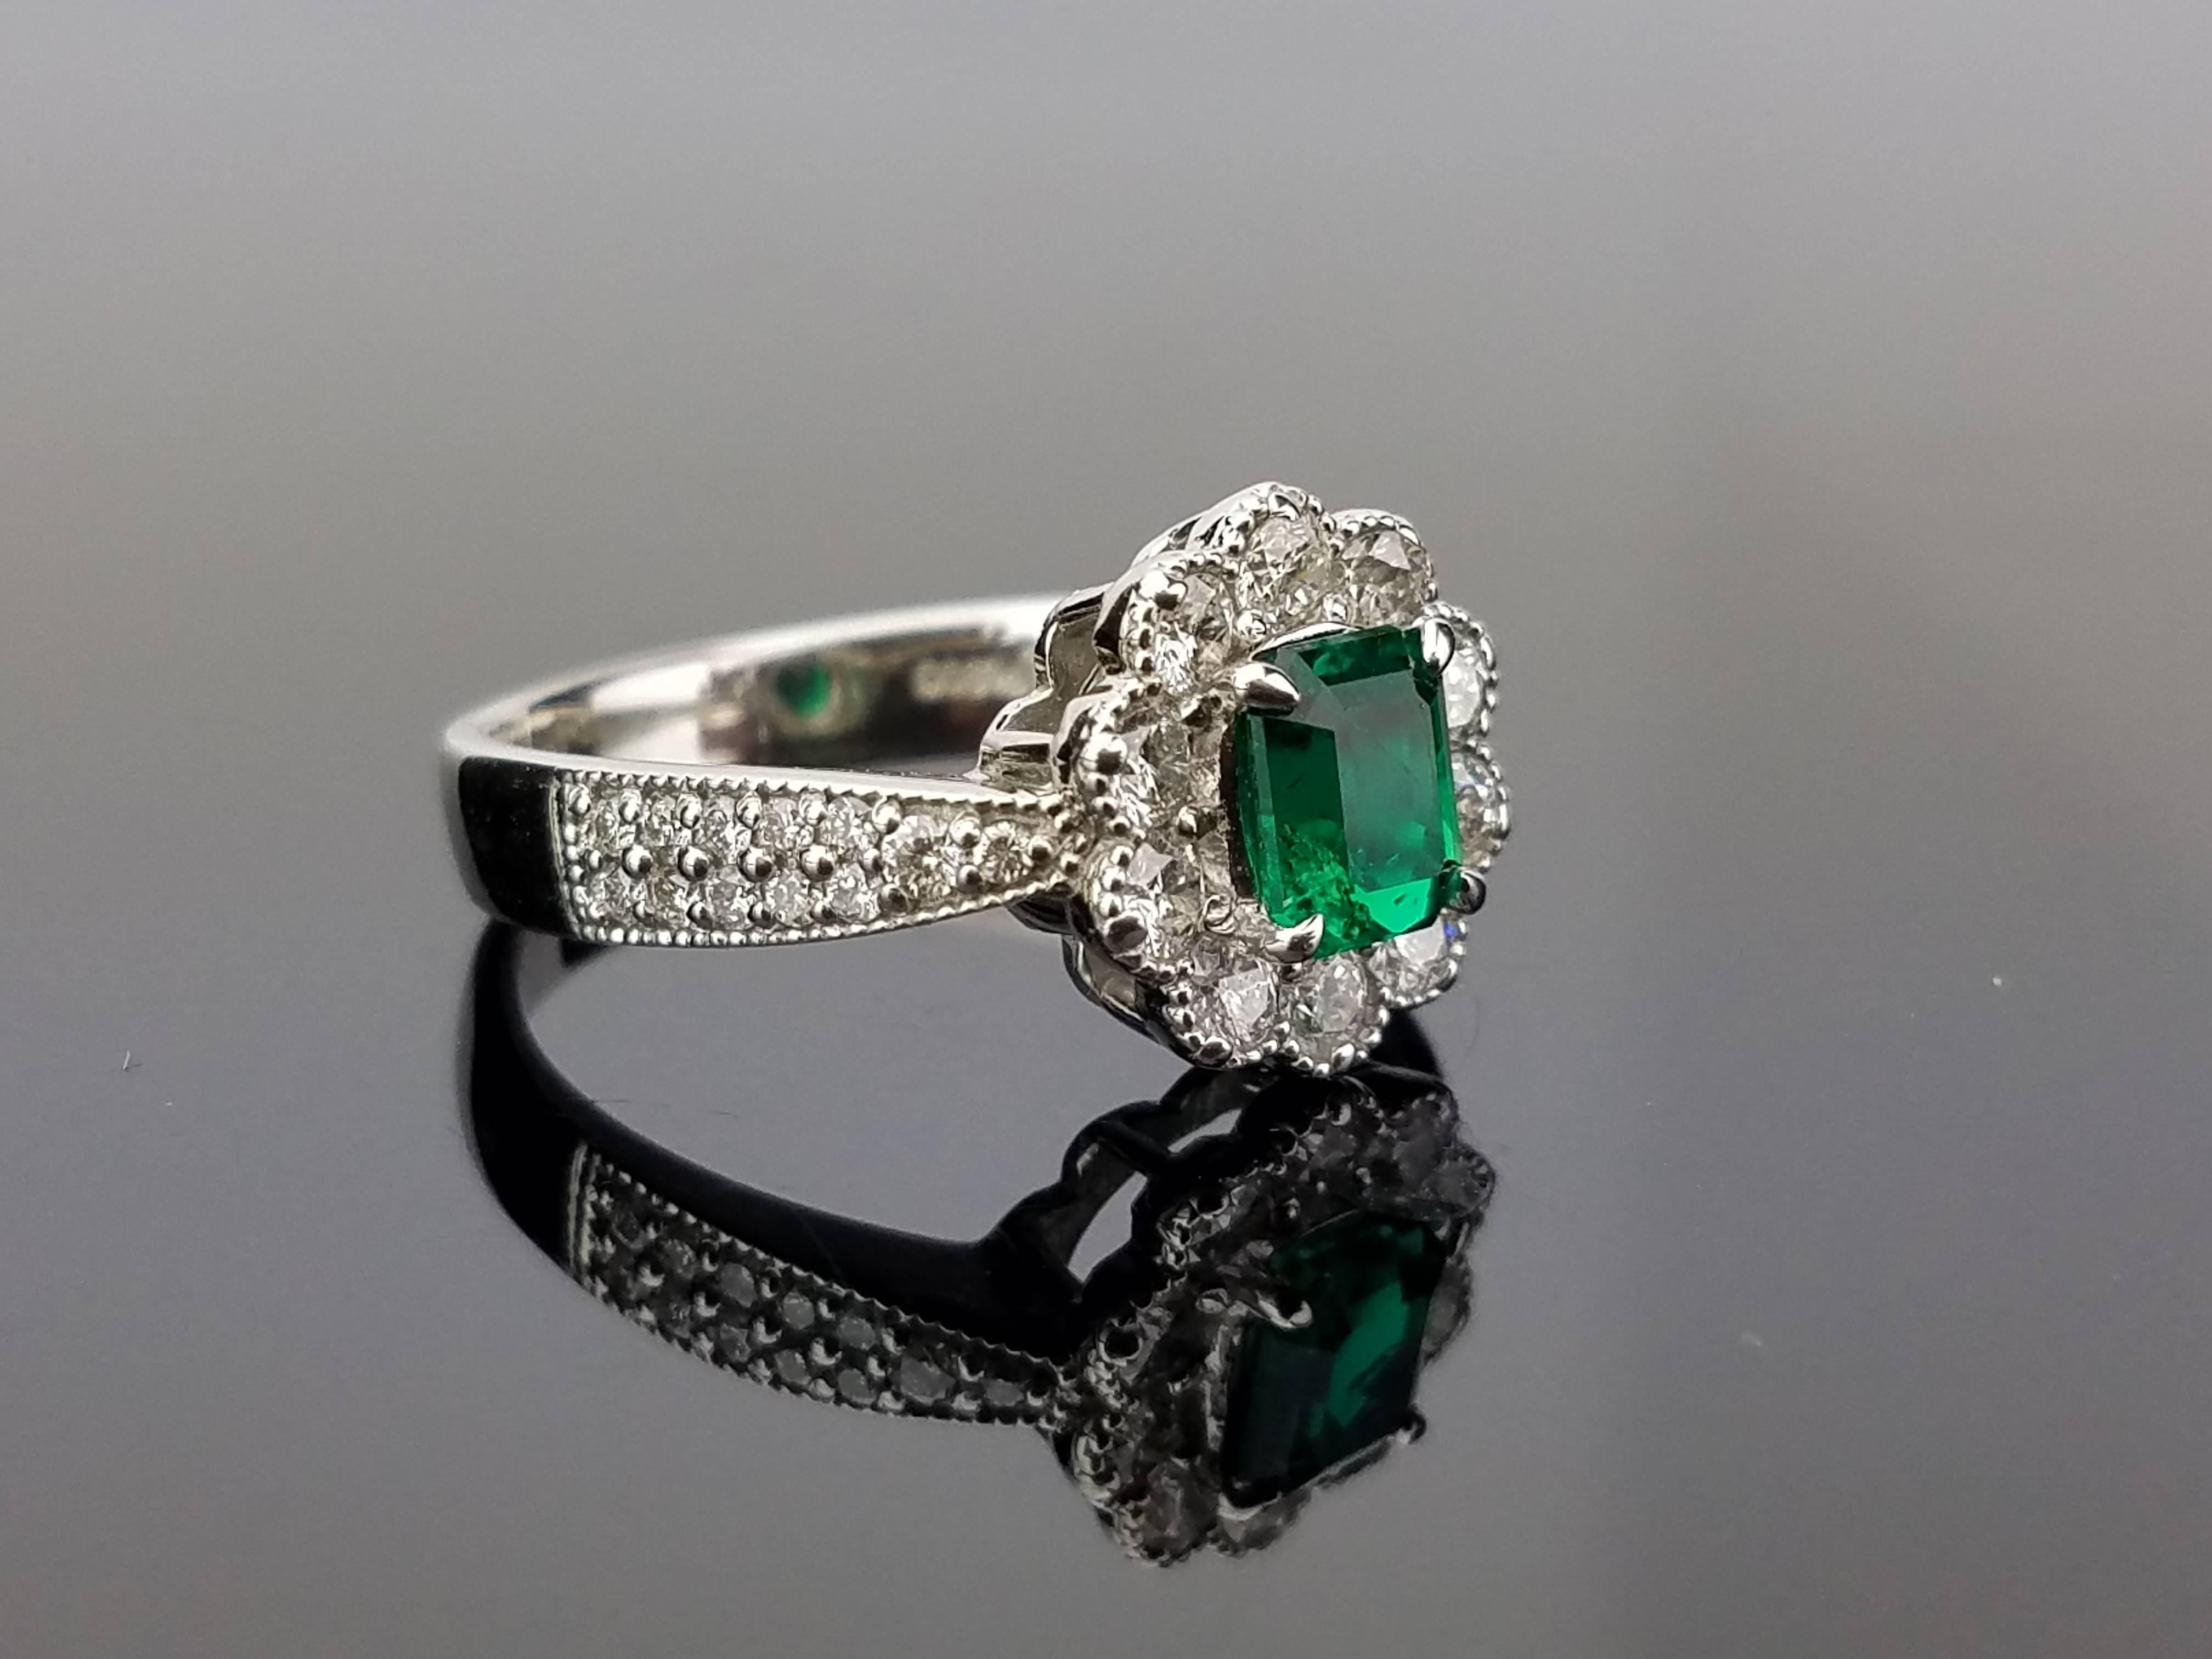 An elegant art deco with a stunning, lustrous Emerald centre stone surrounded with white Diamond, all set in platinum. 

Stone Details: 
Stone: Emerald
Carat Weight: 0.72 Carats

Diamond Details: 
Total Carat Weight: 0.67 carat
Quality: VS/SI ,